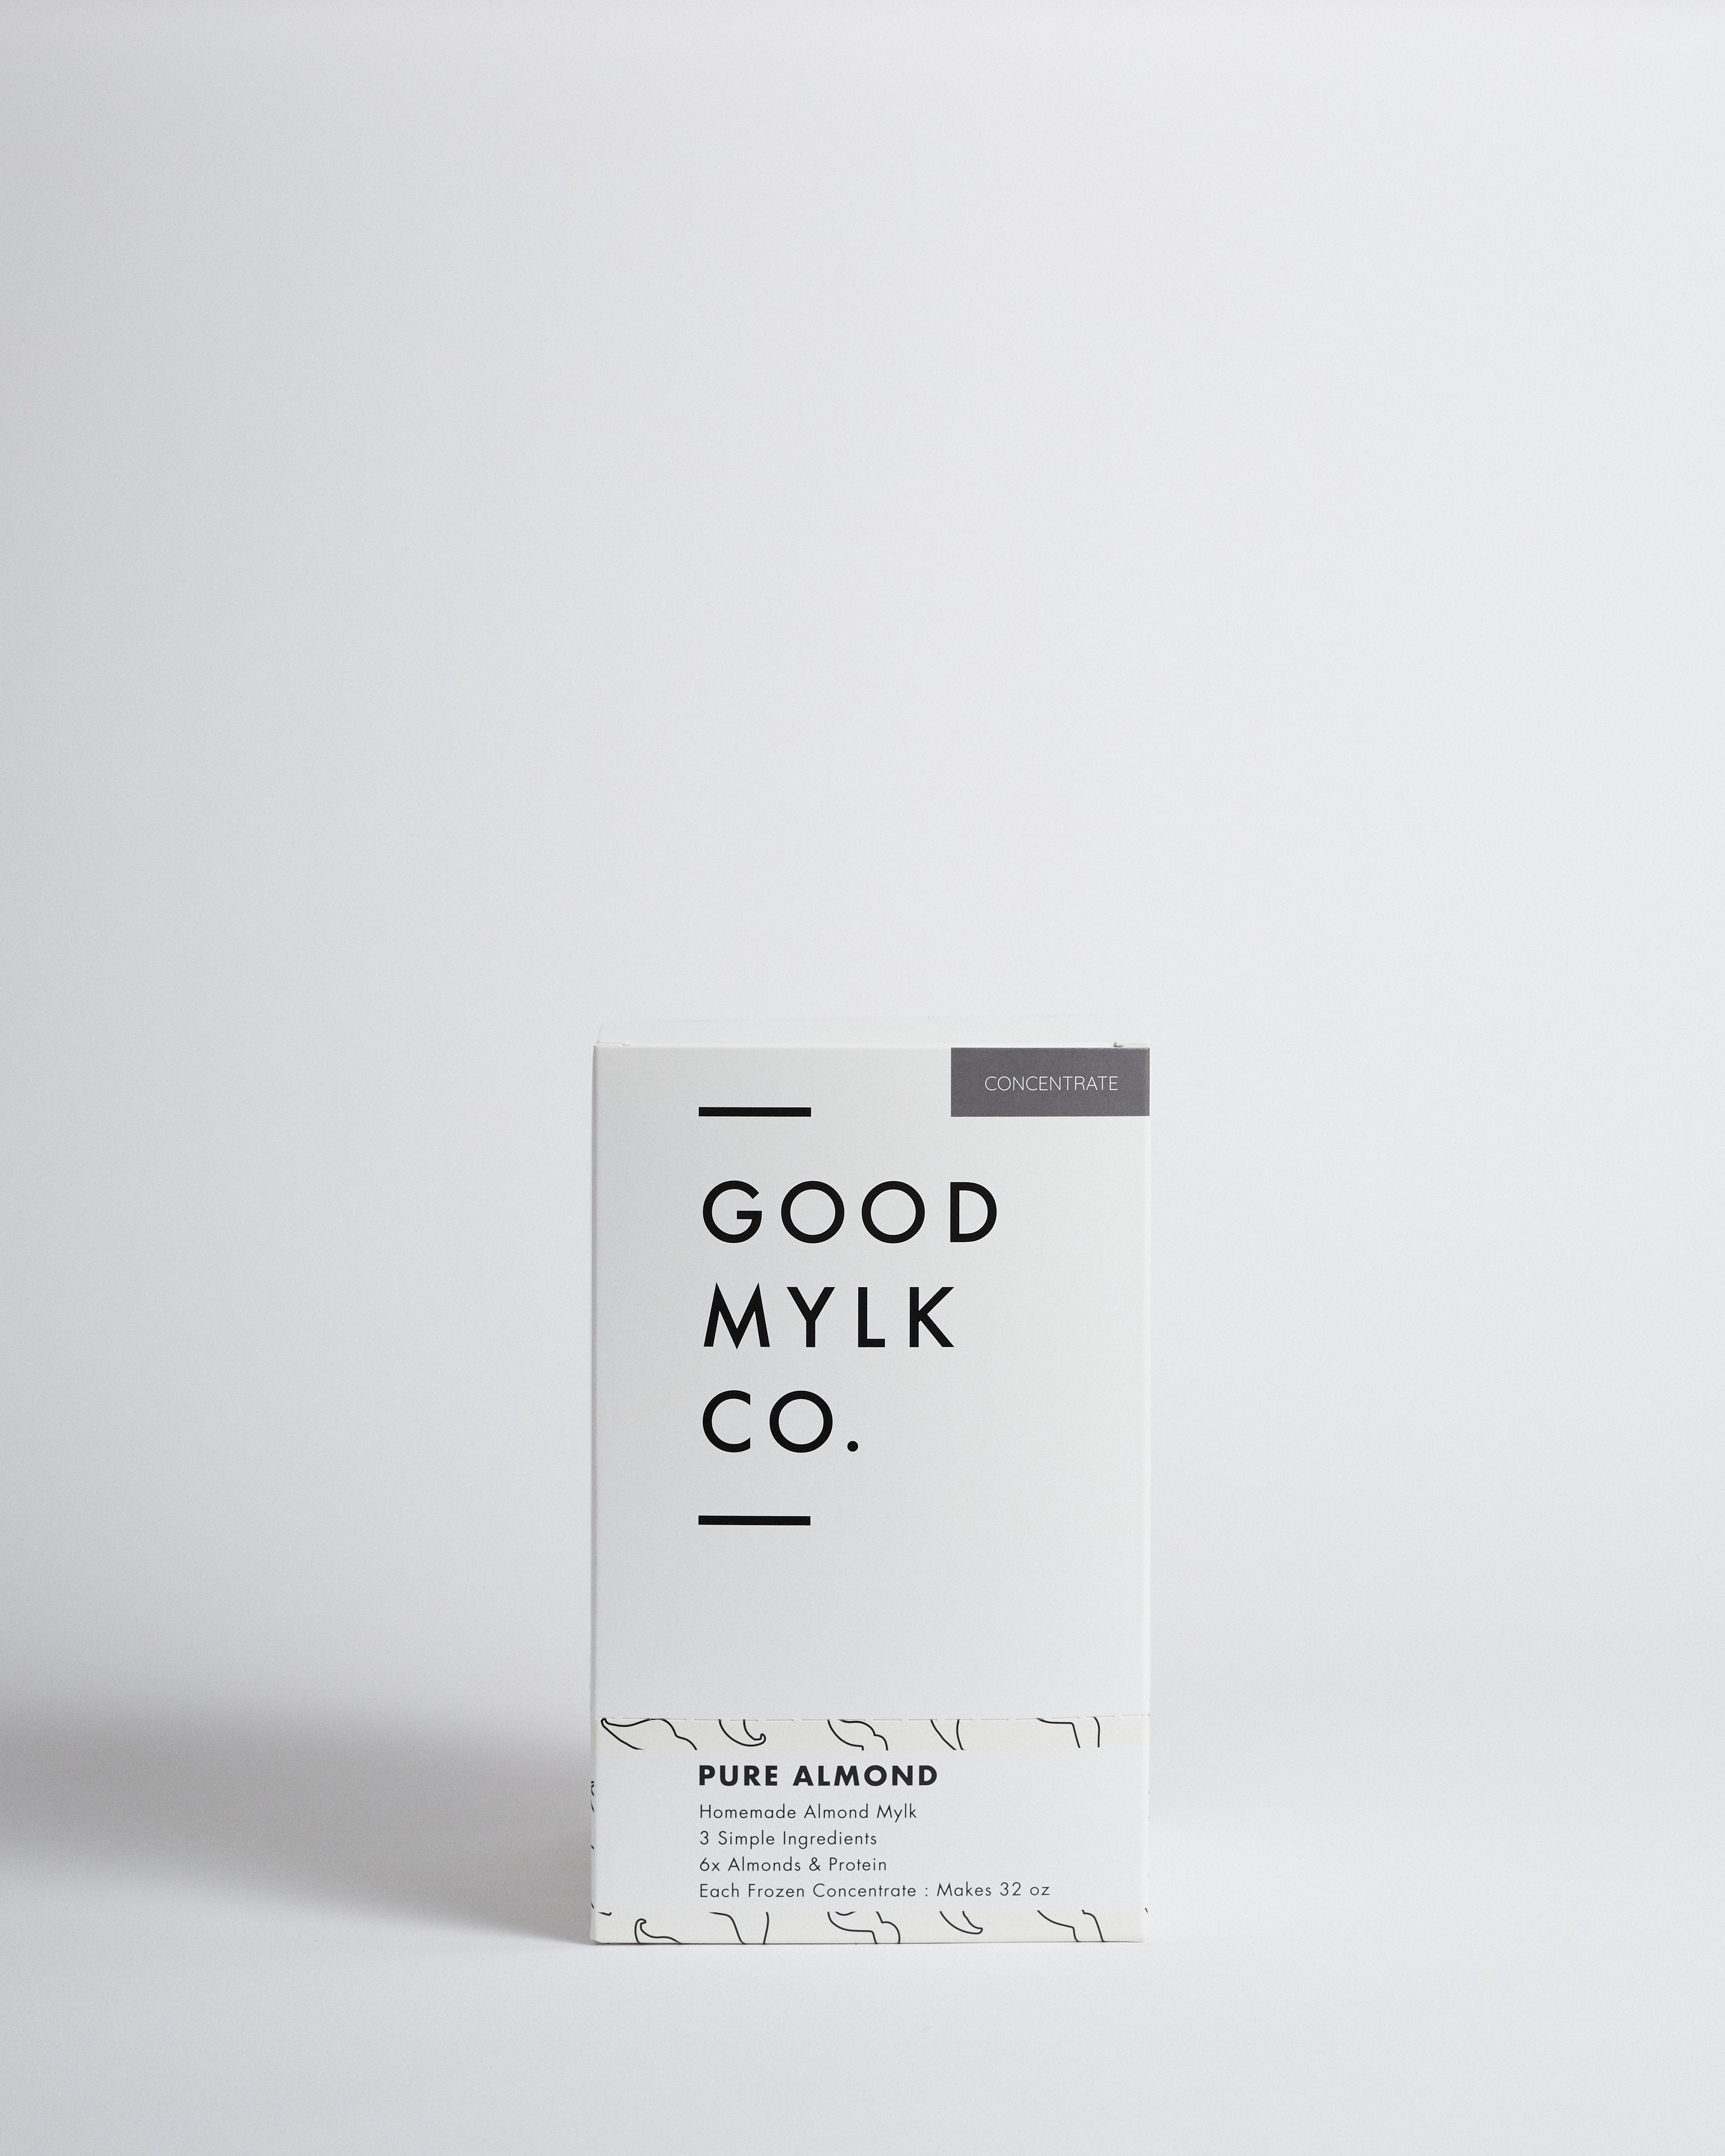 Almond Mylk Concentrate Goodmylk Co. Pure (Unsweetened) 6-Pack 